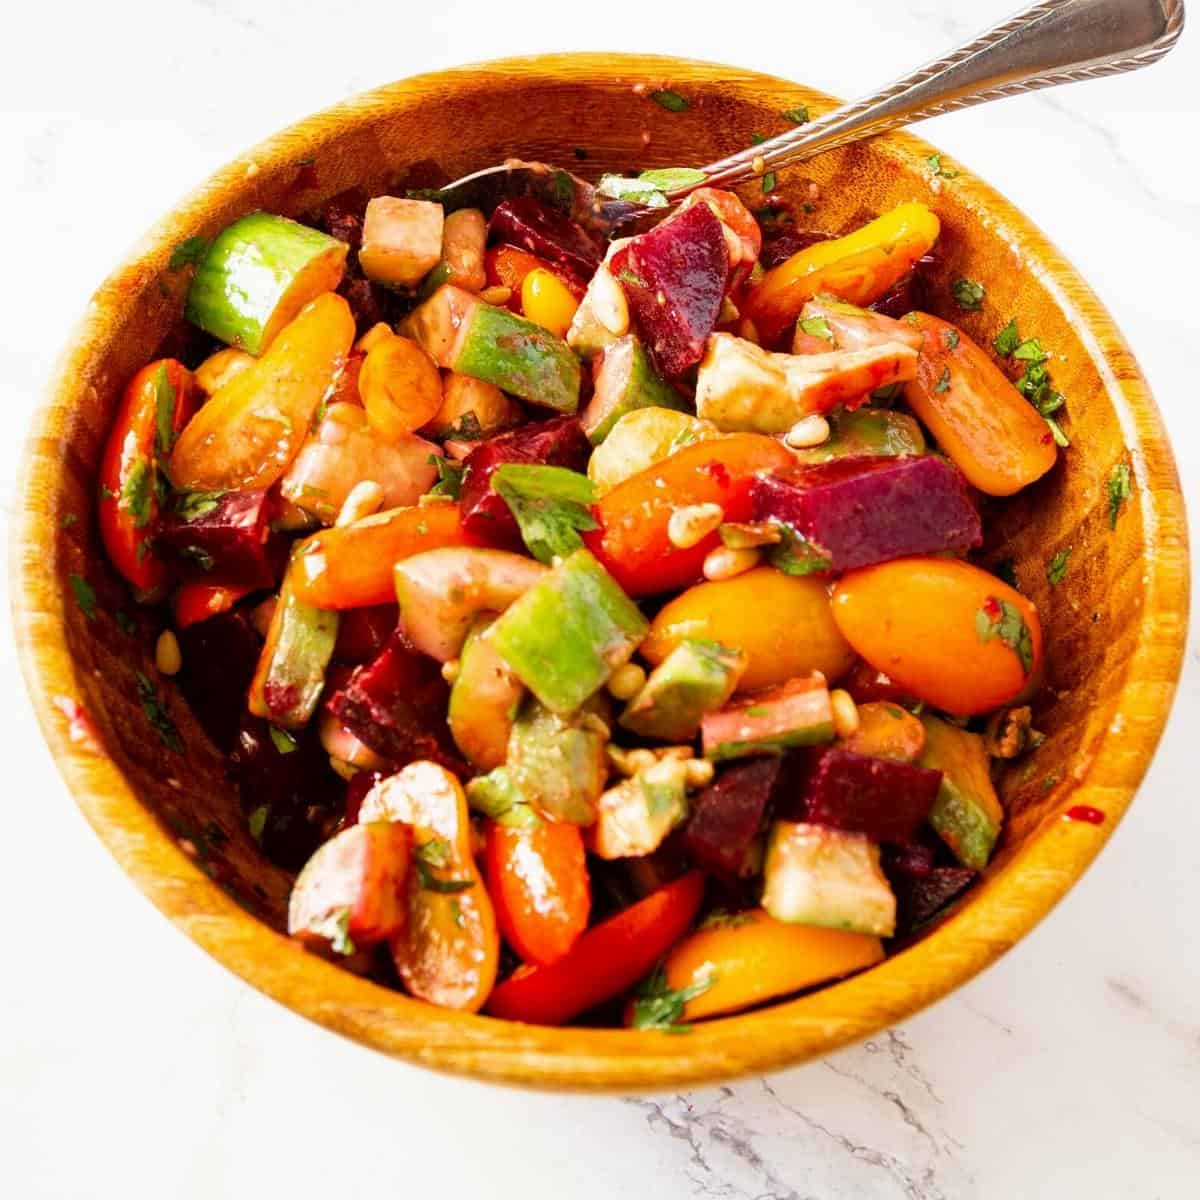 Beet salad recipe in a bowl with cherry tomatoes and avocado.